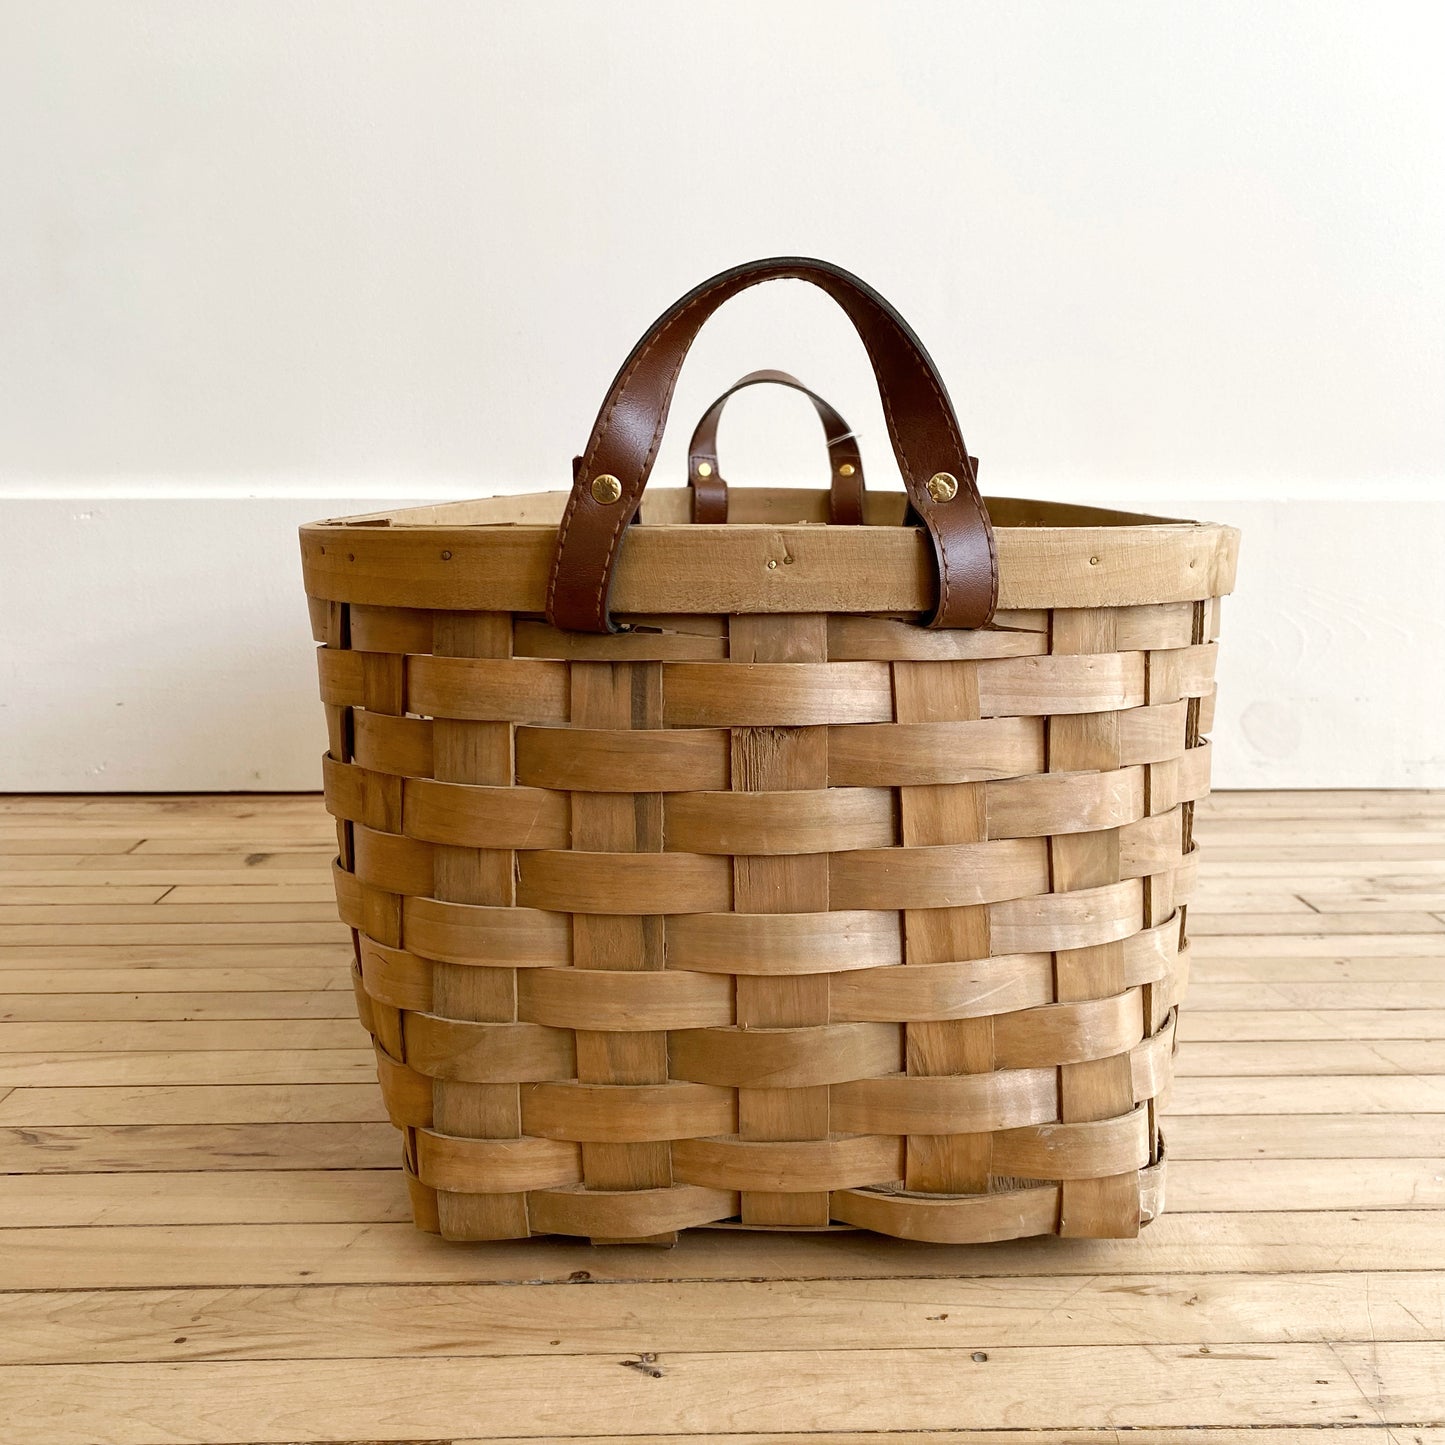 XL Vintage Woven Basket with Handles